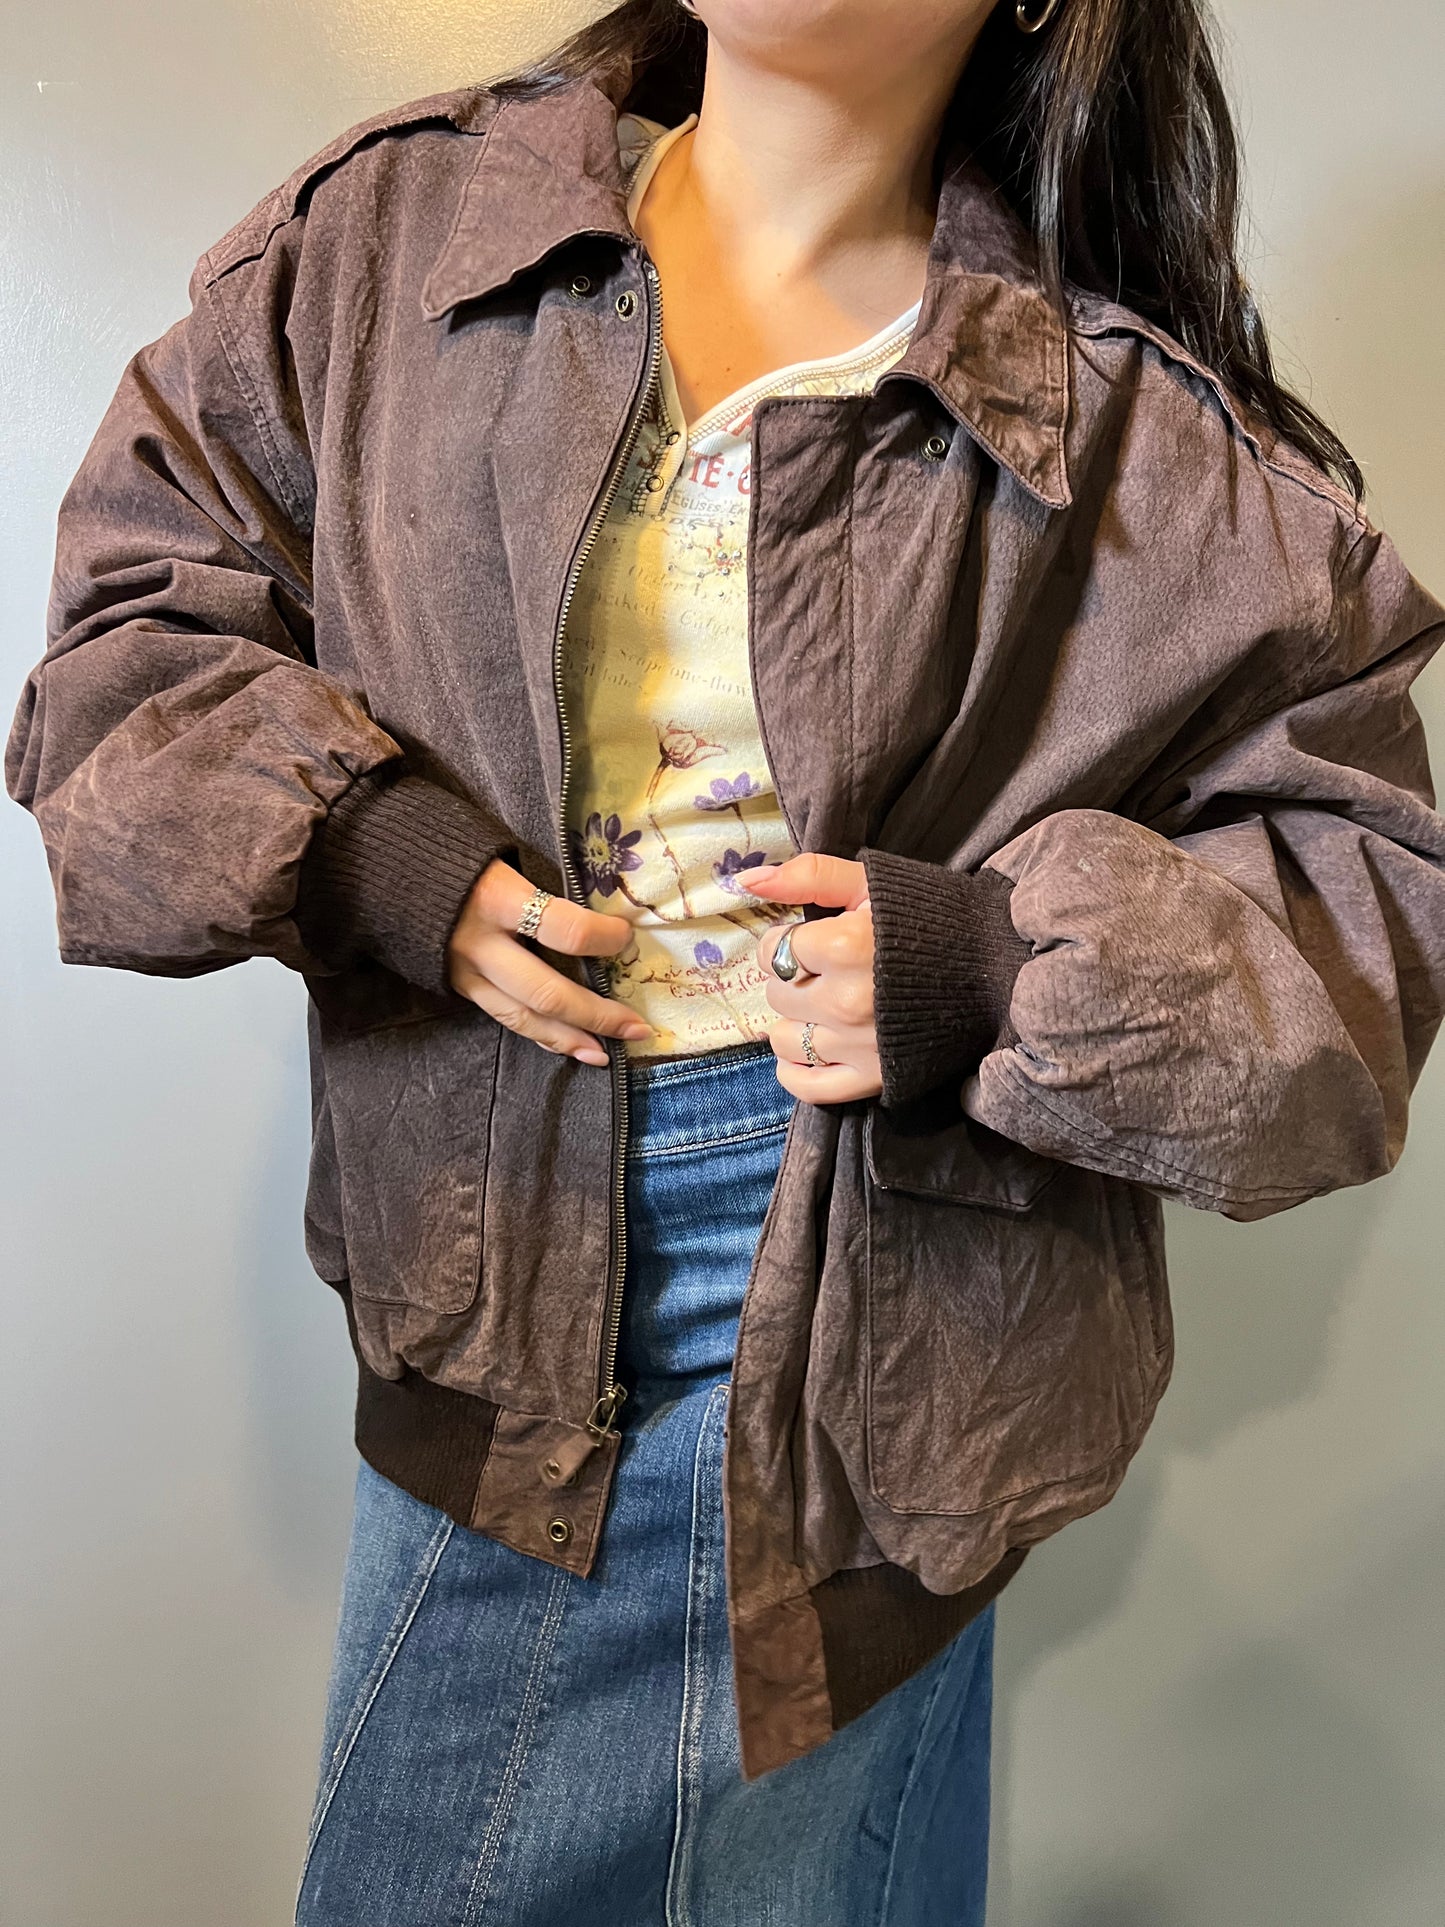 Brown Suede Leather Bomber Jacket - L